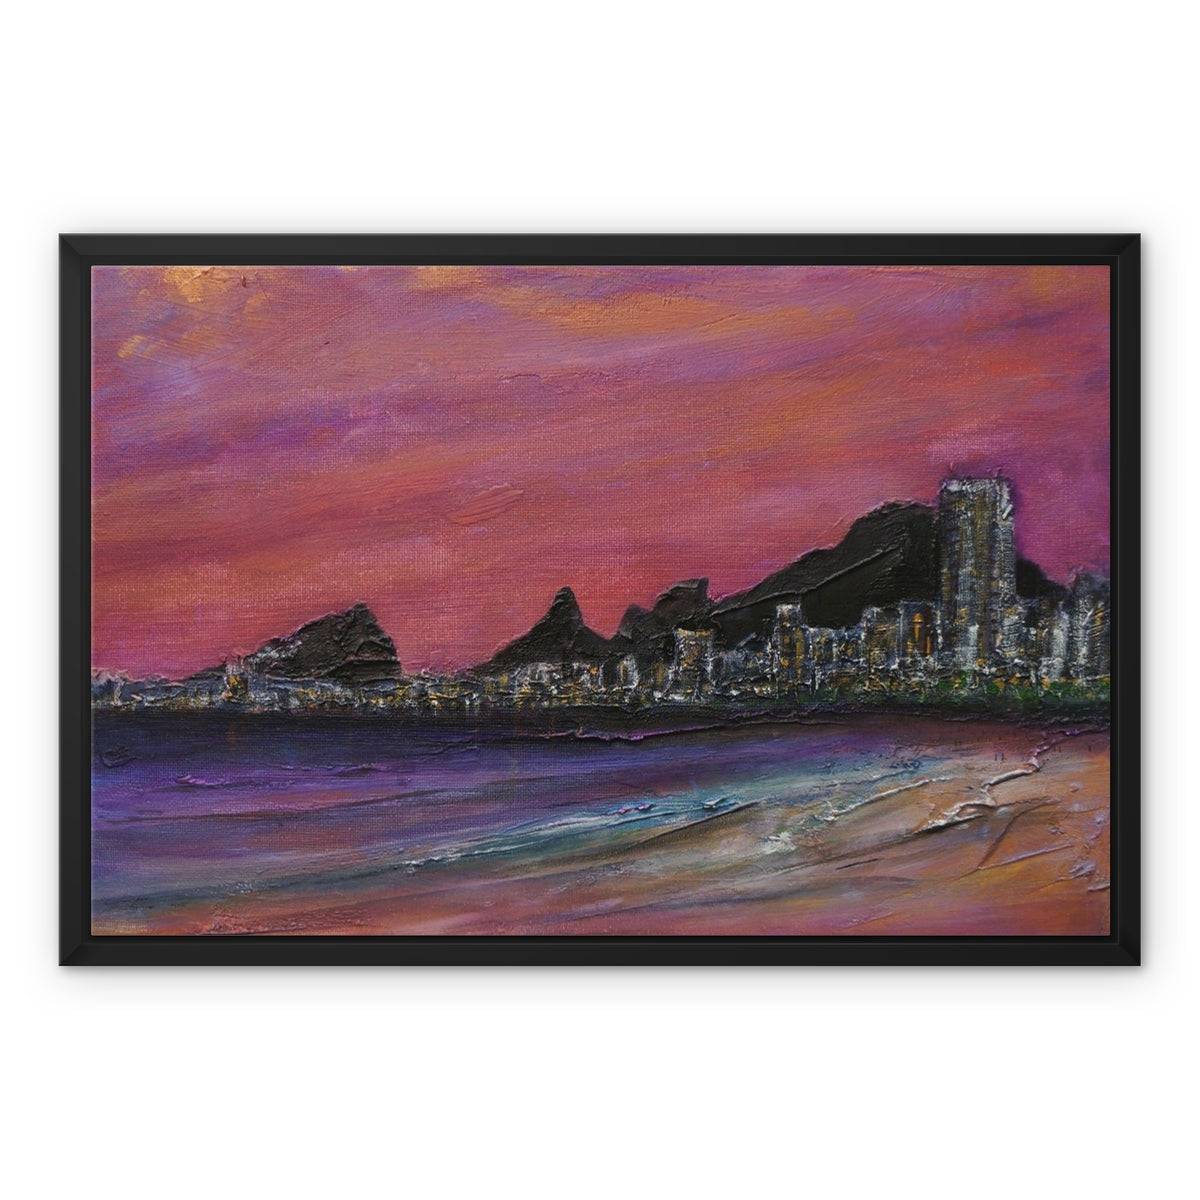 Copacabana Beach Dusk Painting | Framed Canvas From Scotland-Floating Framed Canvas Prints-World Art Gallery-24"x18"-Paintings, Prints, Homeware, Art Gifts From Scotland By Scottish Artist Kevin Hunter